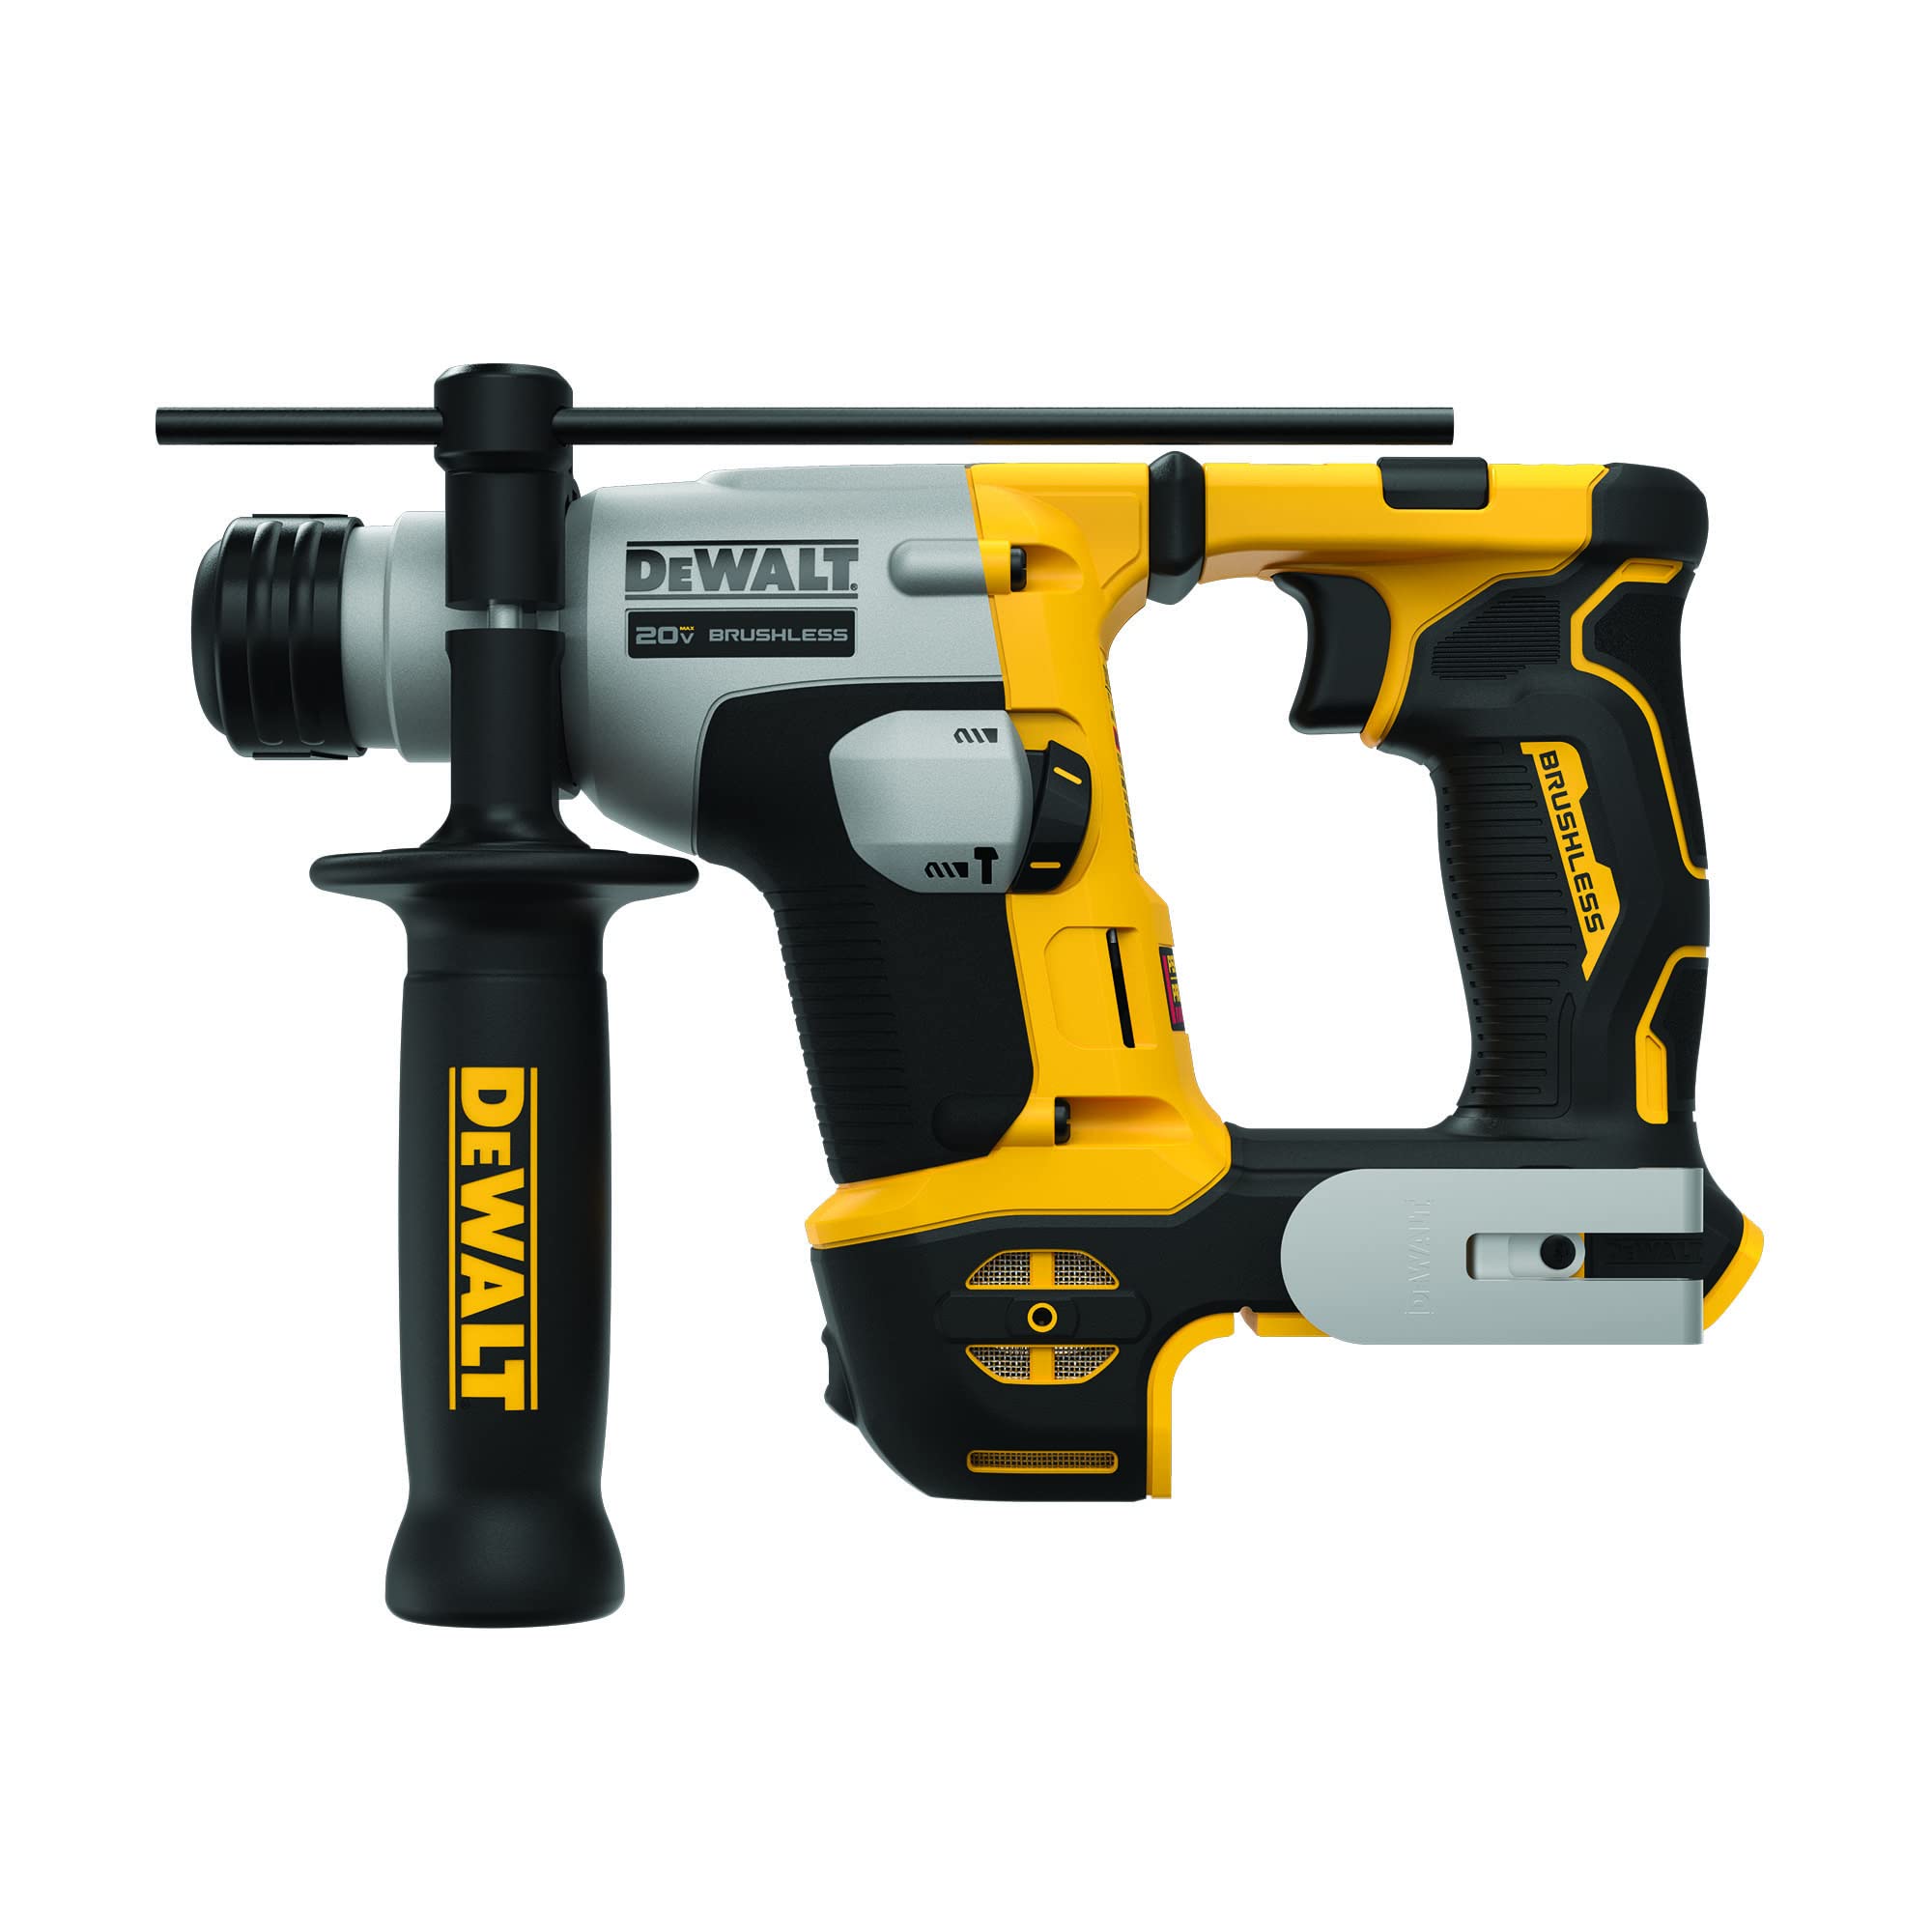 DEWALT 20V MAX SDS Plus Rotary Hammer Drill, Cordless, 5/8 in., Tool Only (DCH172B)